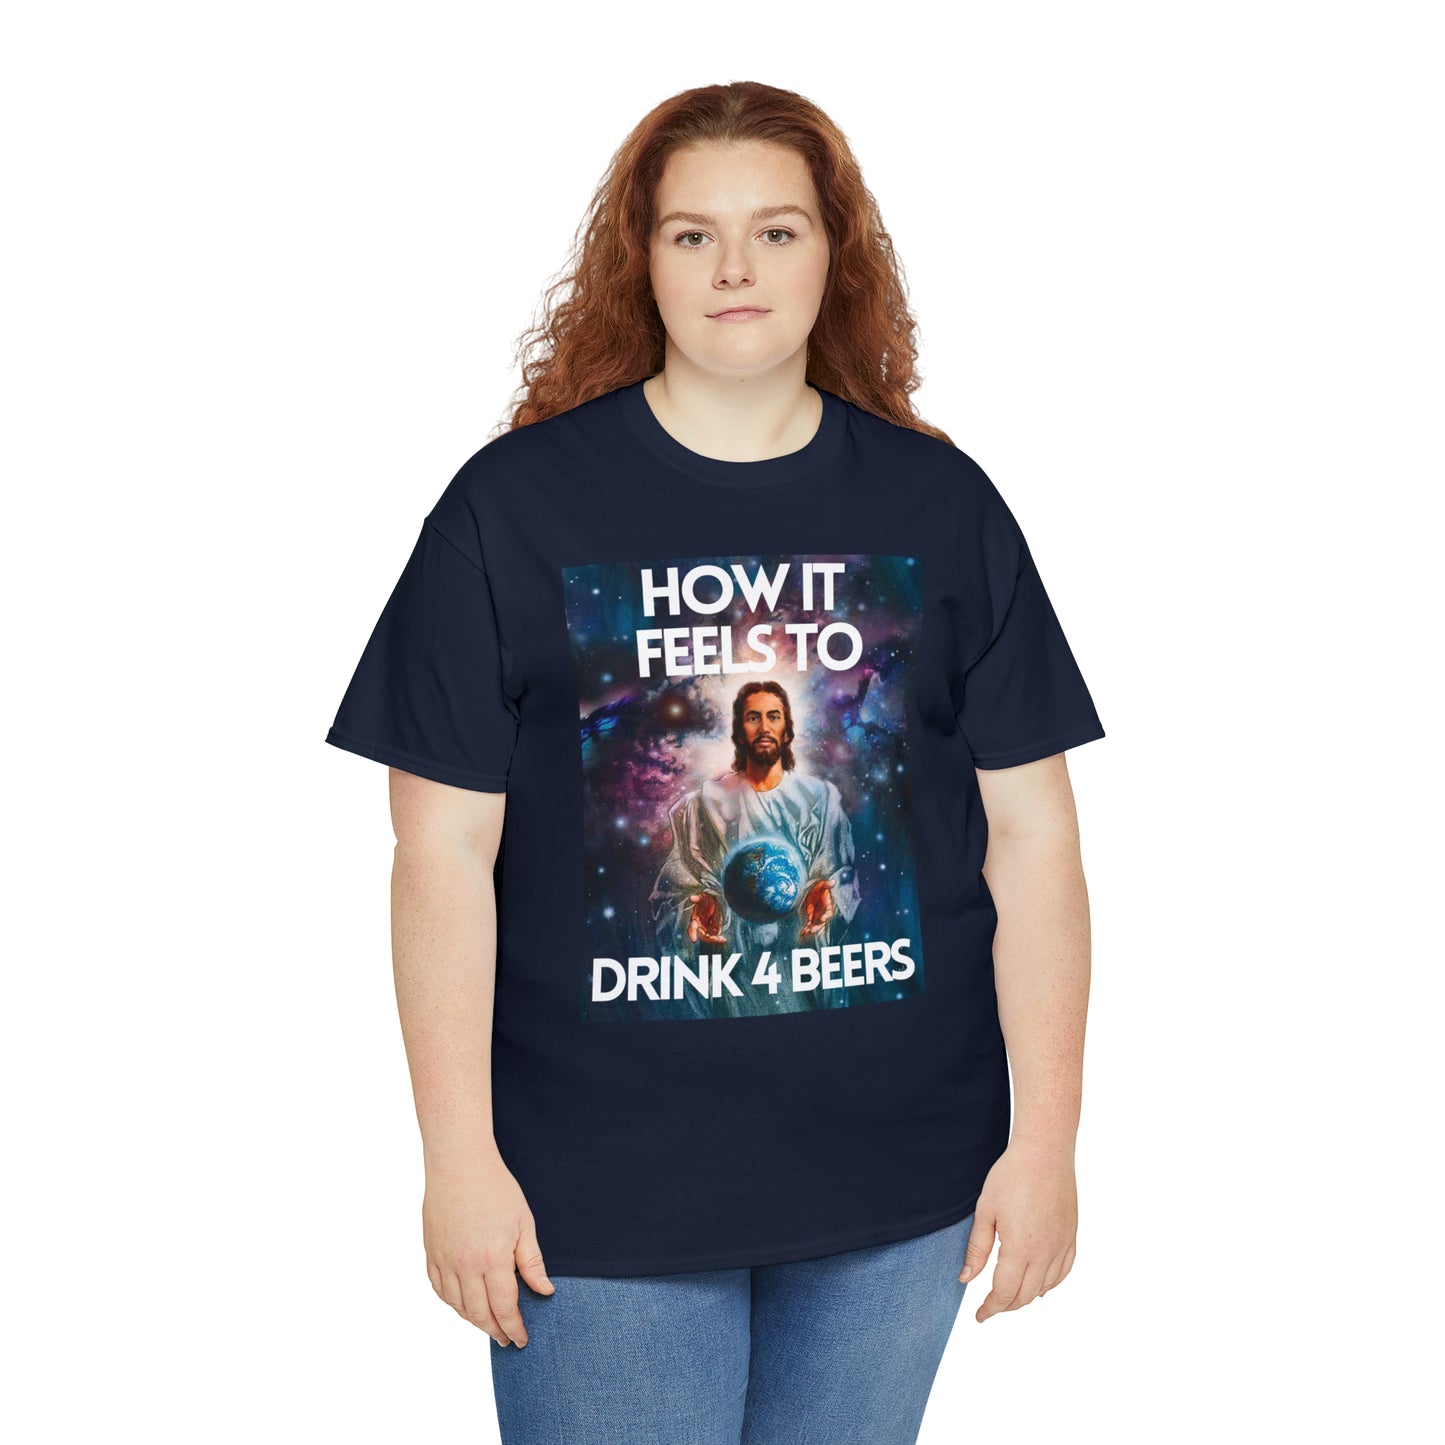 How it feels to drink 4 beers - Unisex Heavy Cotton Tee